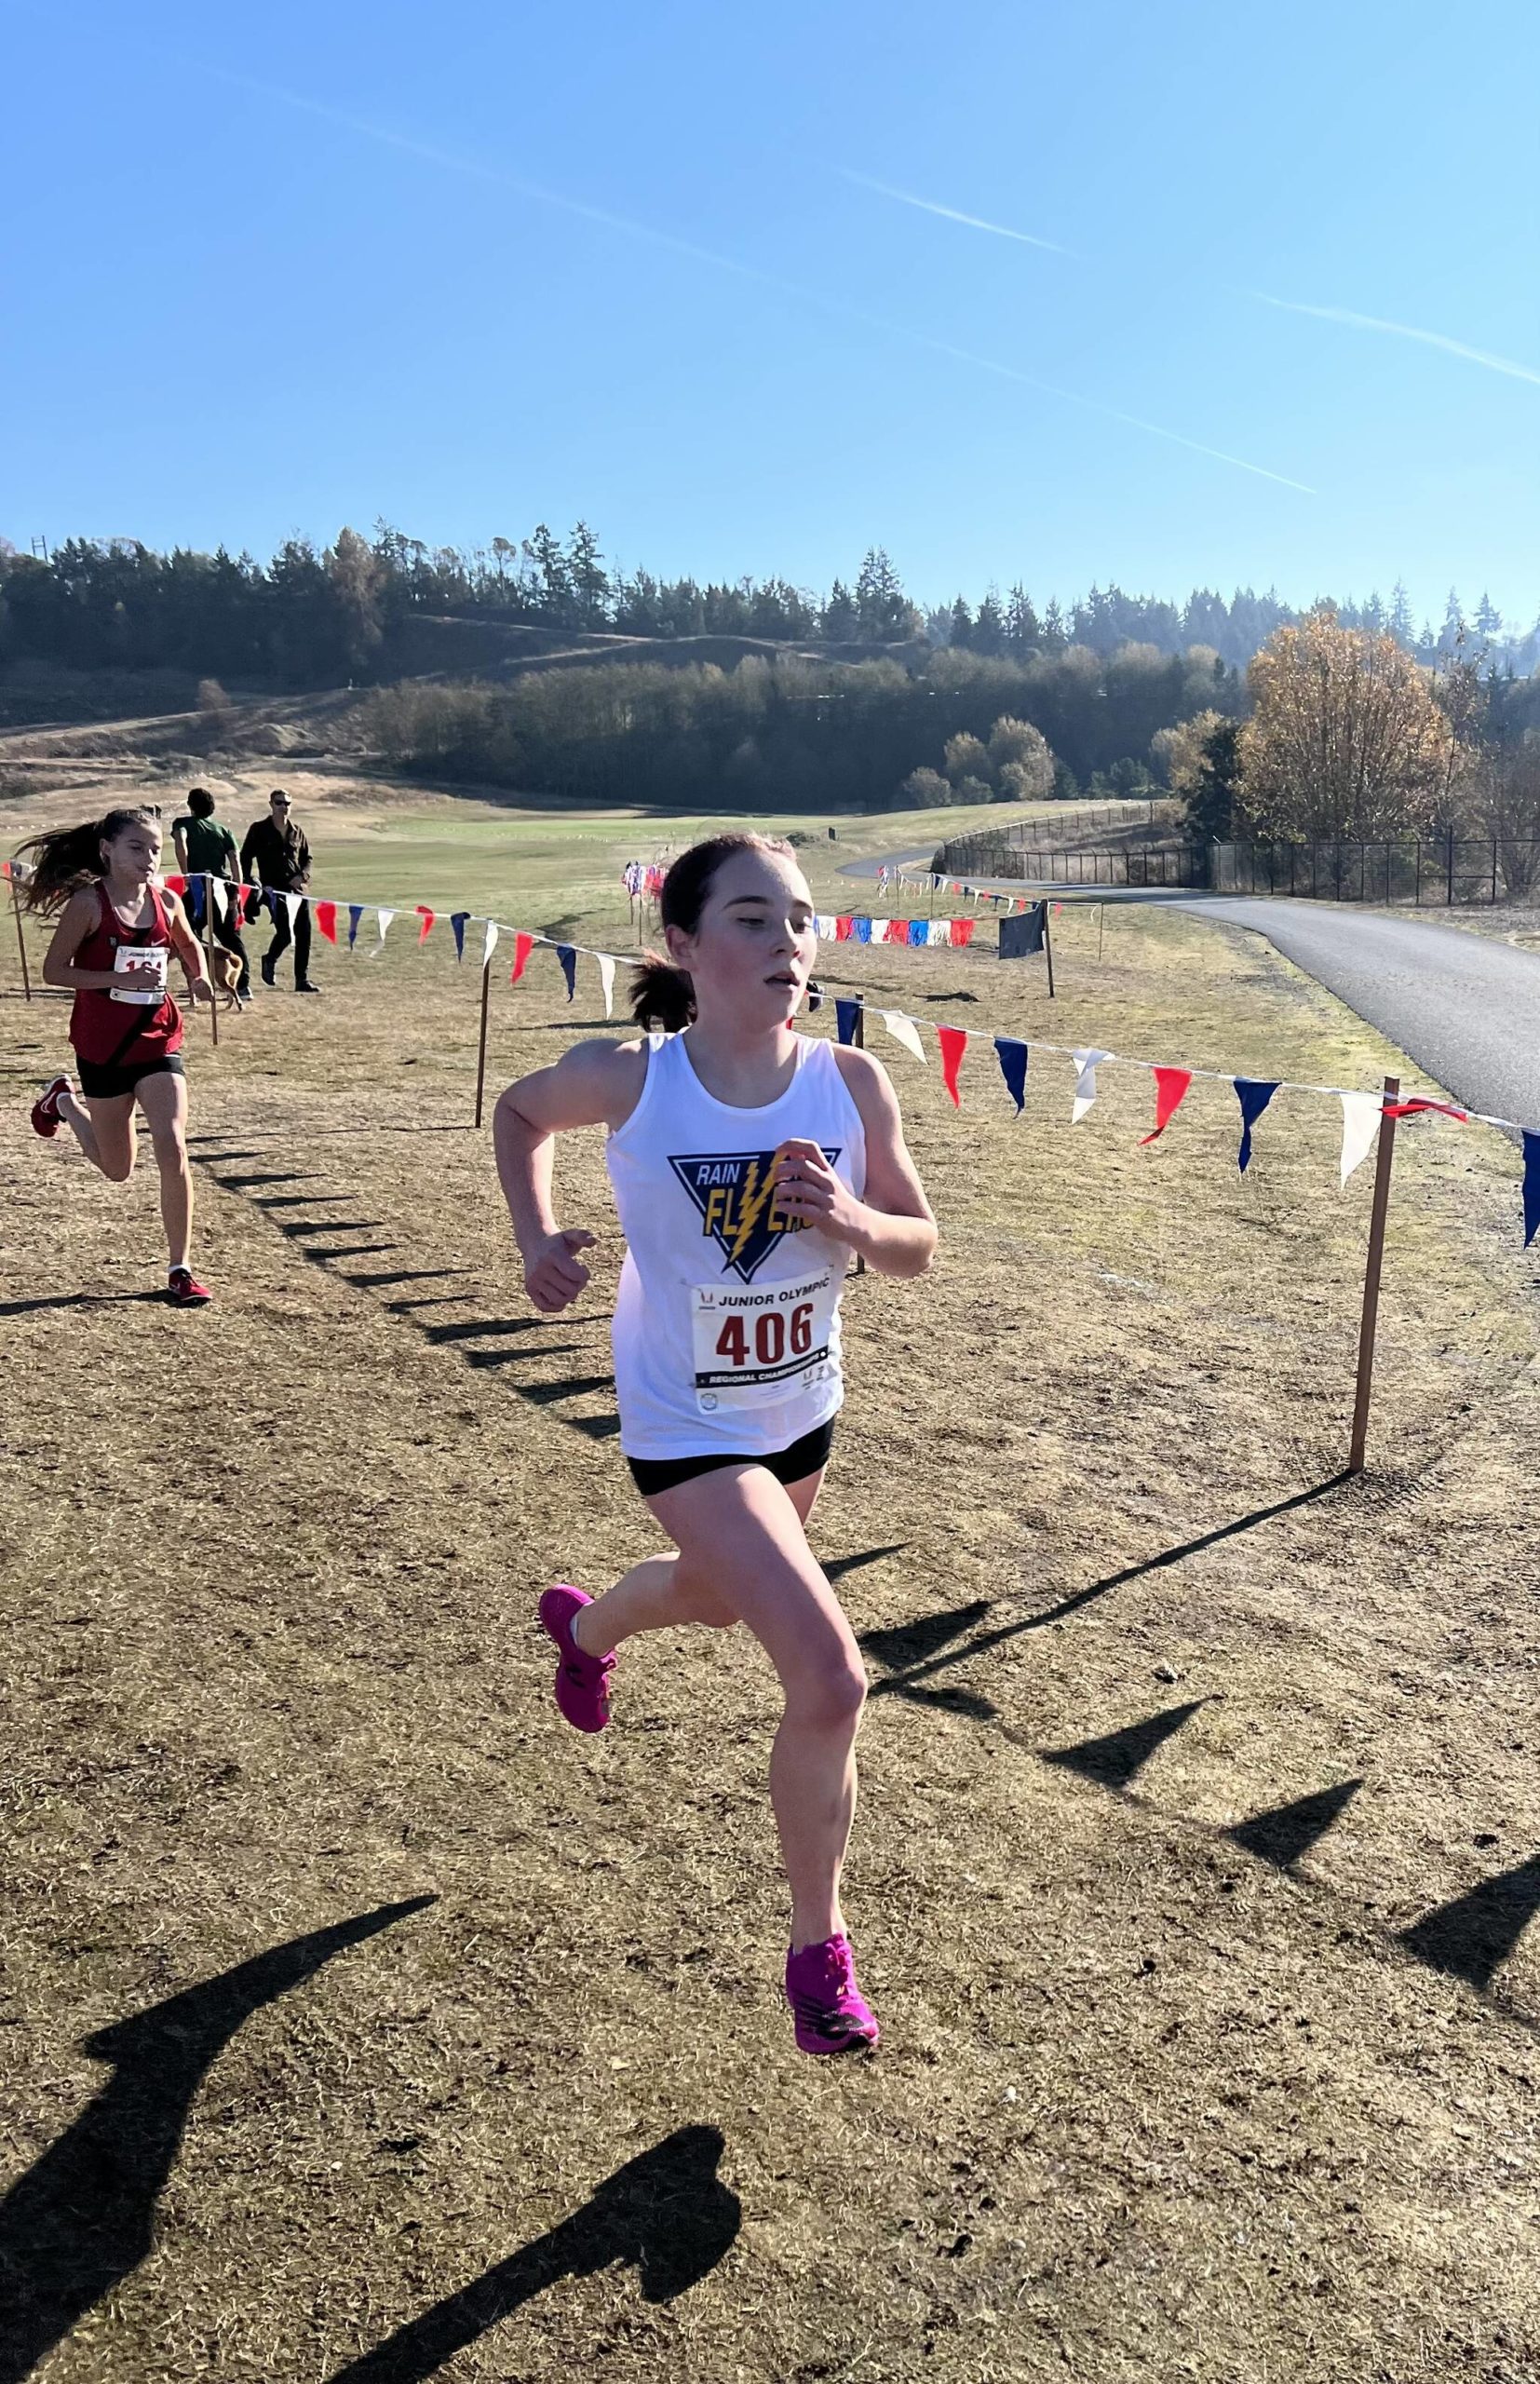 Photo provided
Atwood finished 13th in the 11-12 age group at the USA Track Field Region 13 Junior Olympic Championships with a time of 11 minutes, 54 seconds on Nov. 19.